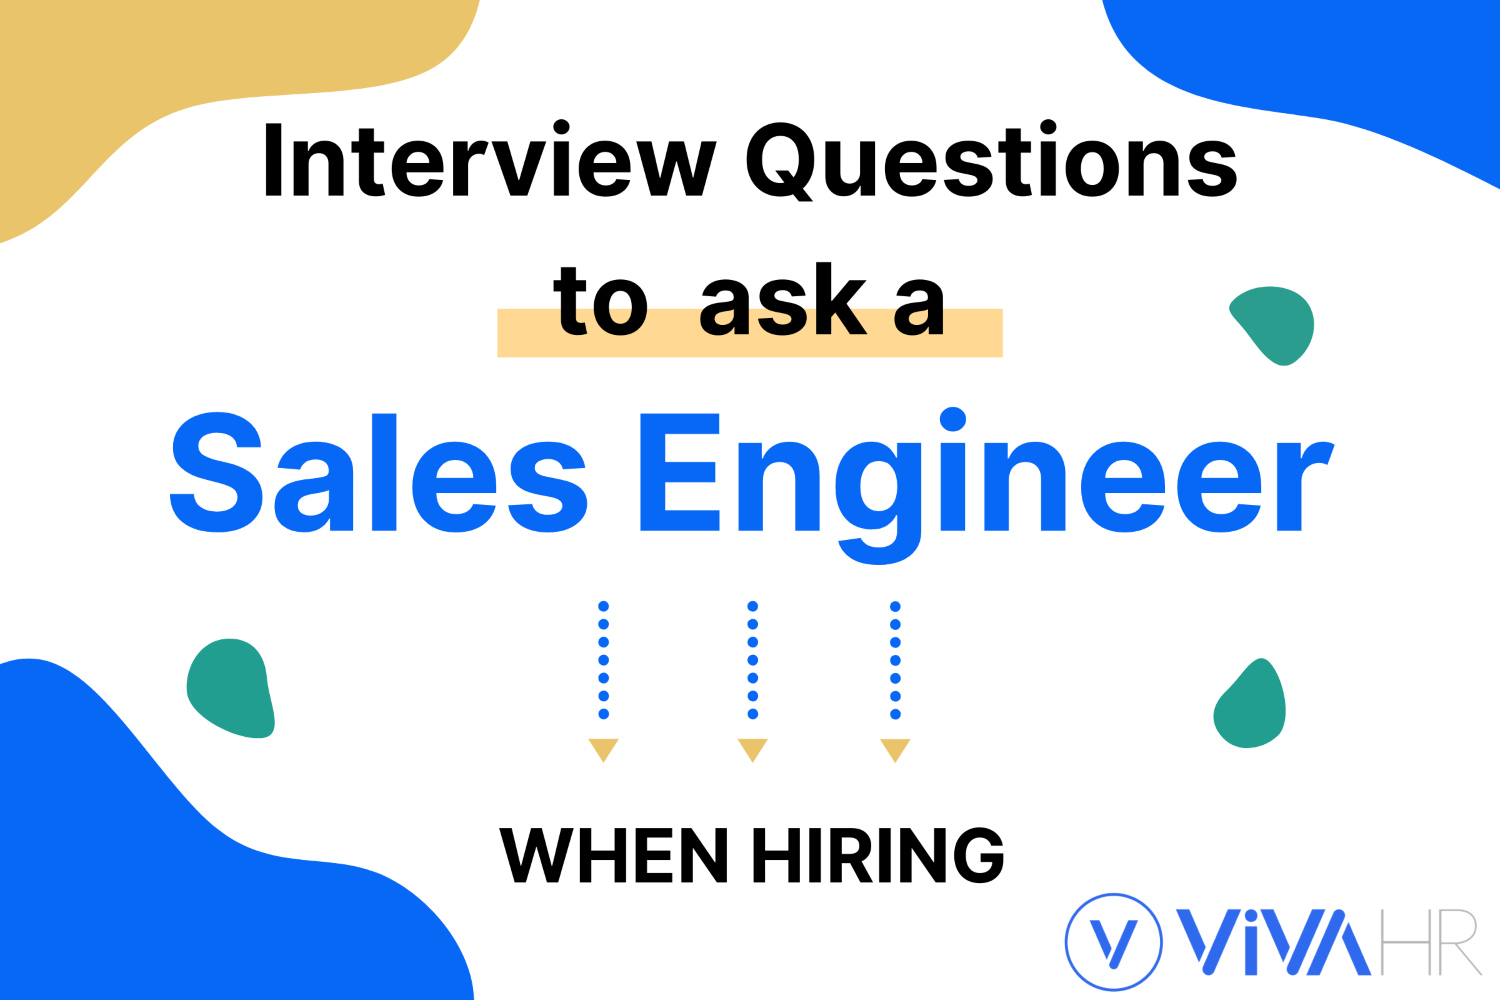 Sales Engineer Interview Questions